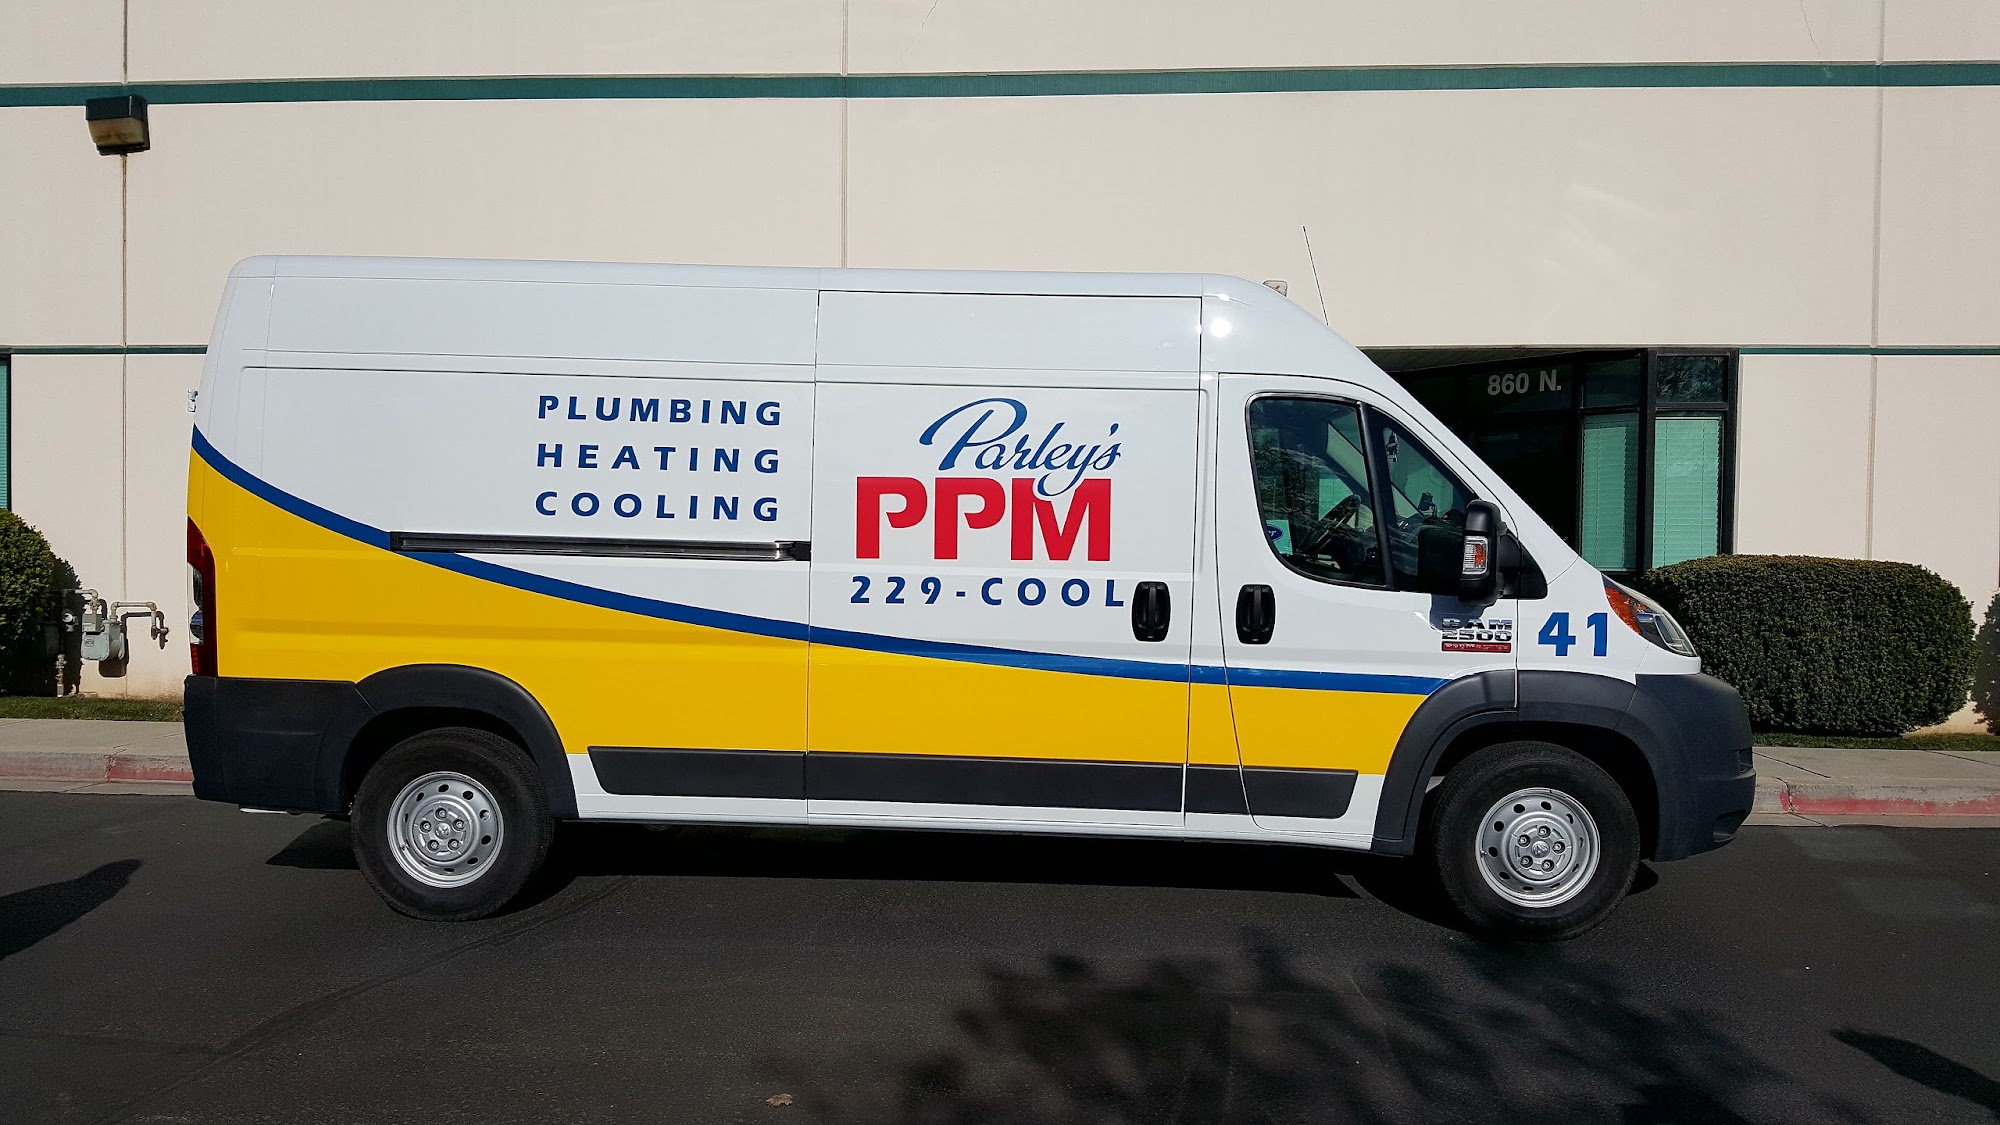 Parley's PPM Plumbing, Heating, & Cooling